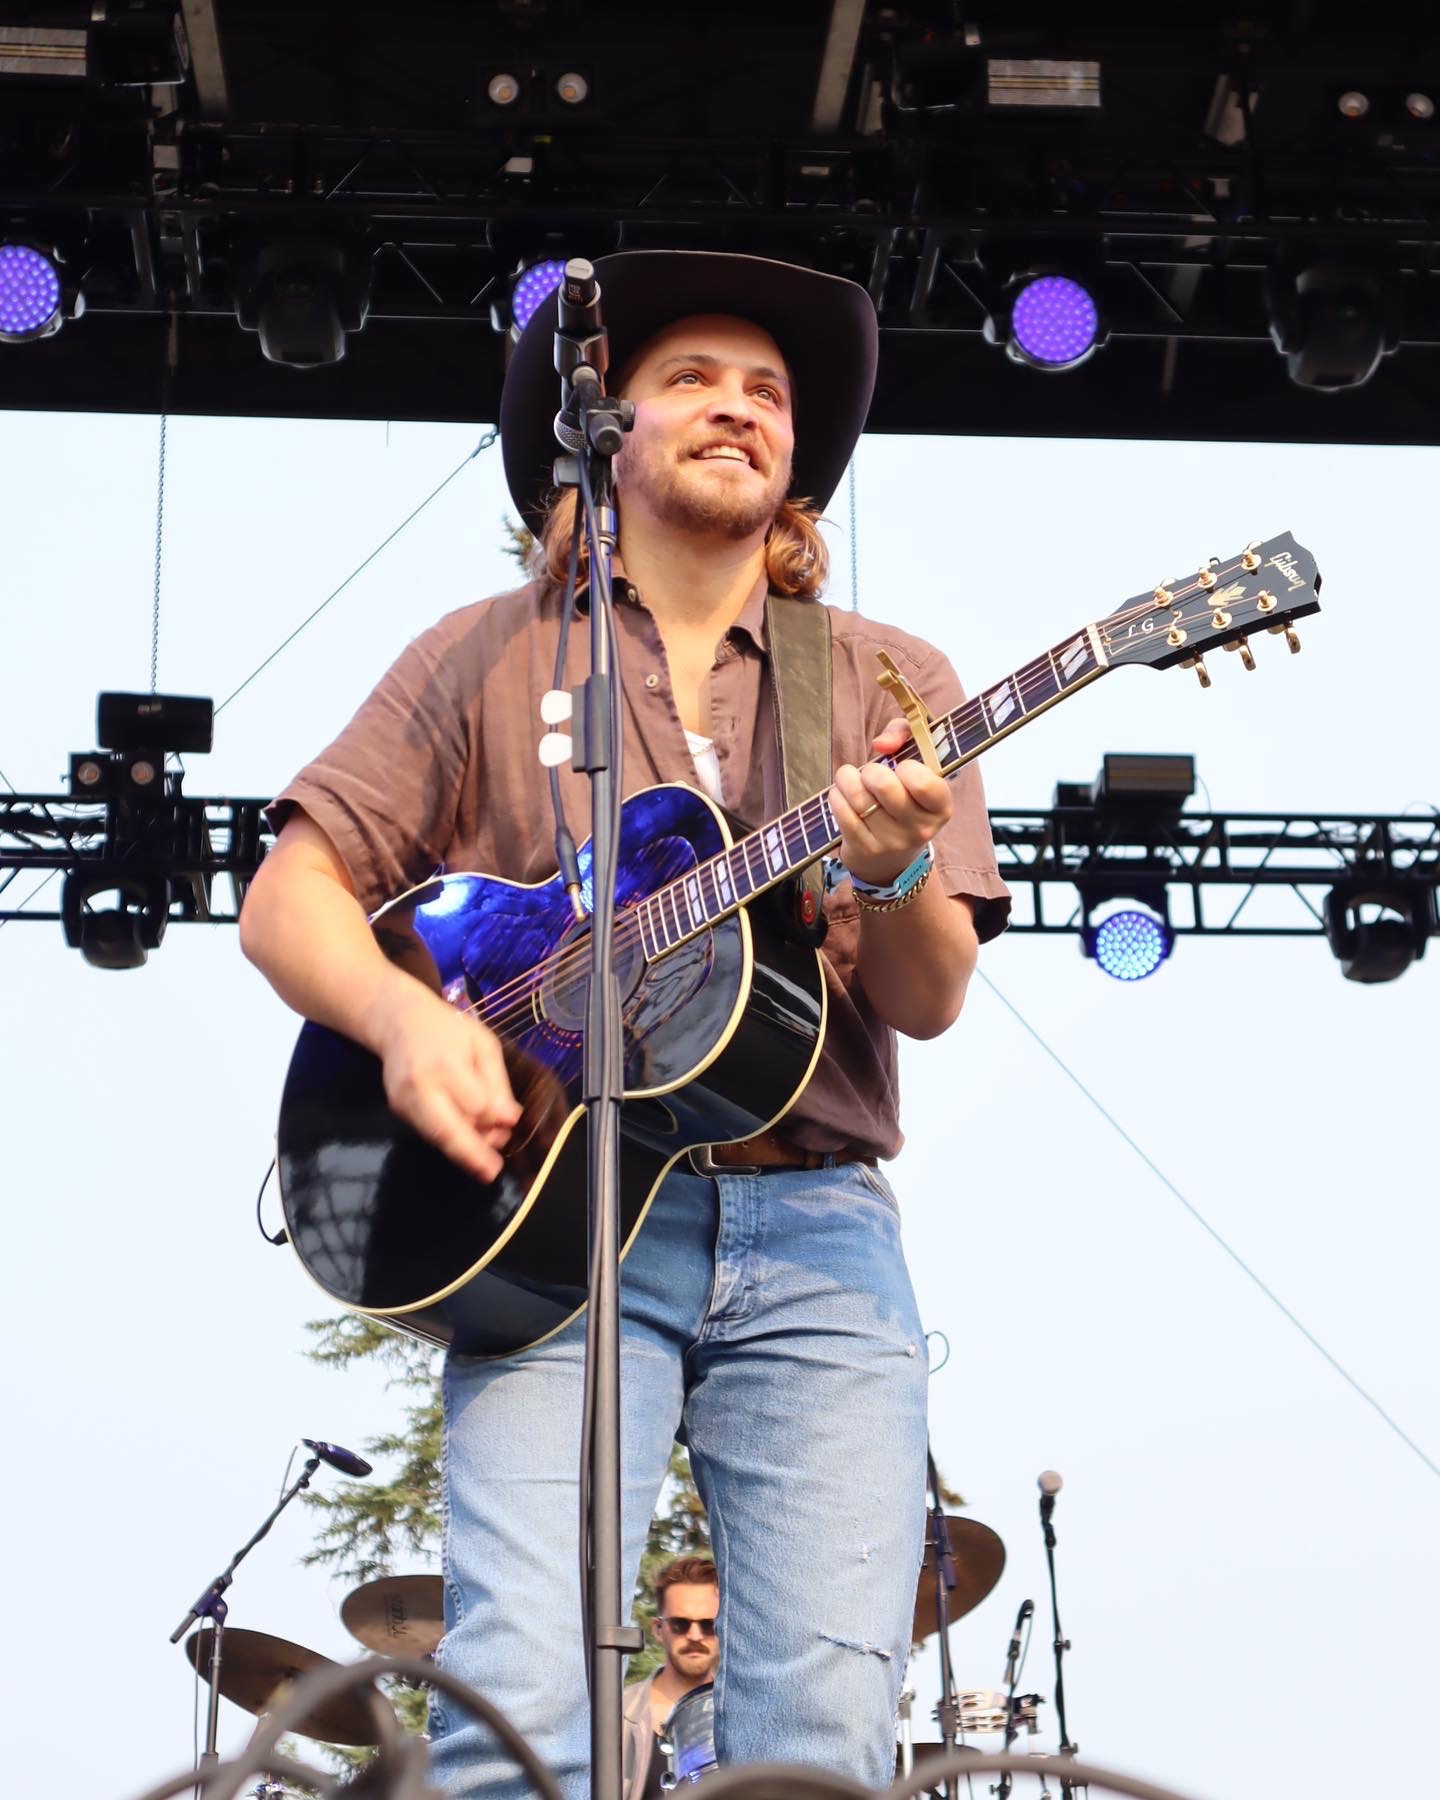 Luke Grimes of Yellowstone fame performing on stage at the 2023 Under the Big Sky Fest.